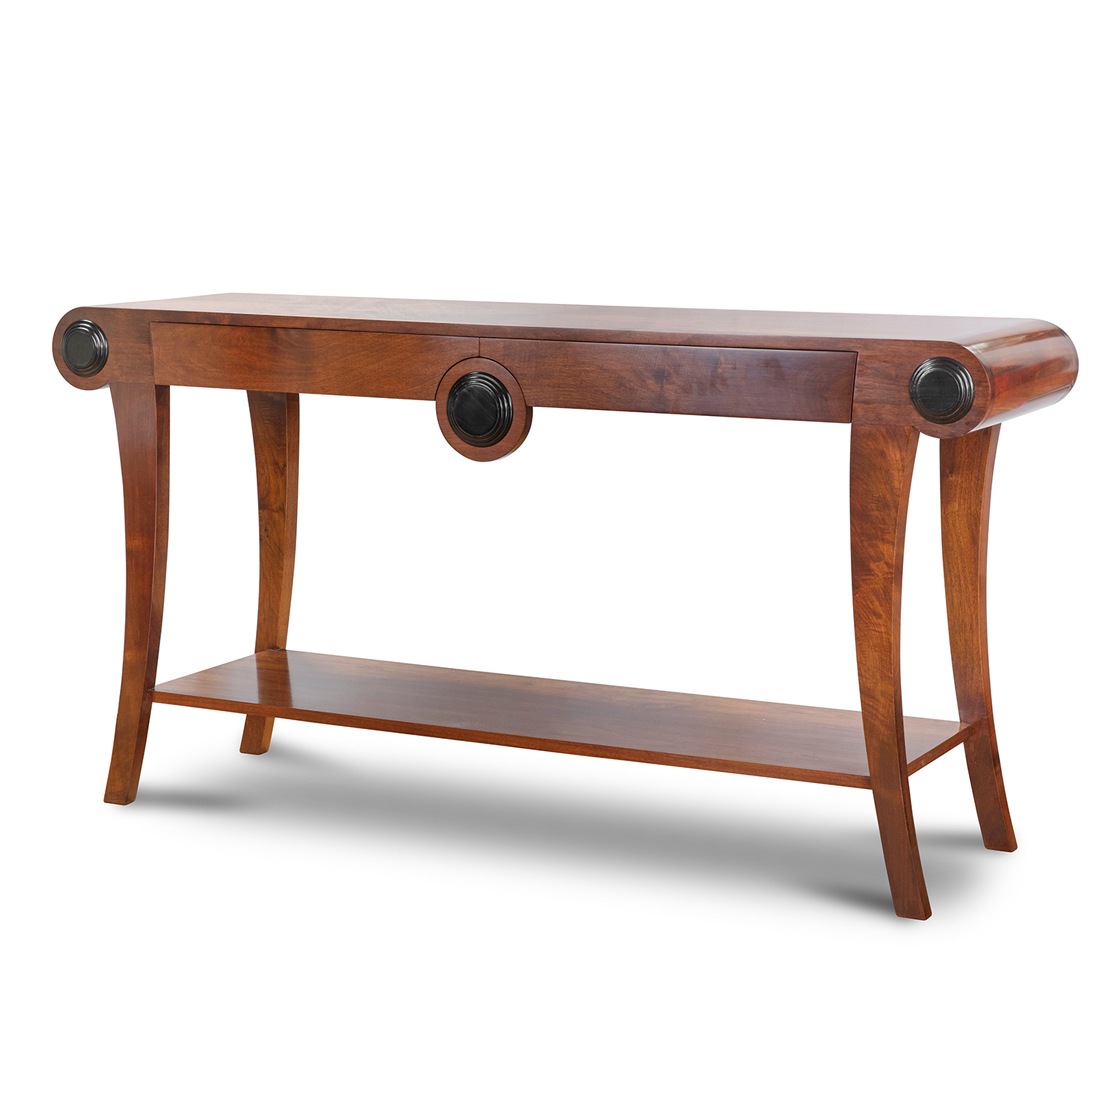 Duke console table in walnut and ebonised details - Beaumont & Fletcher